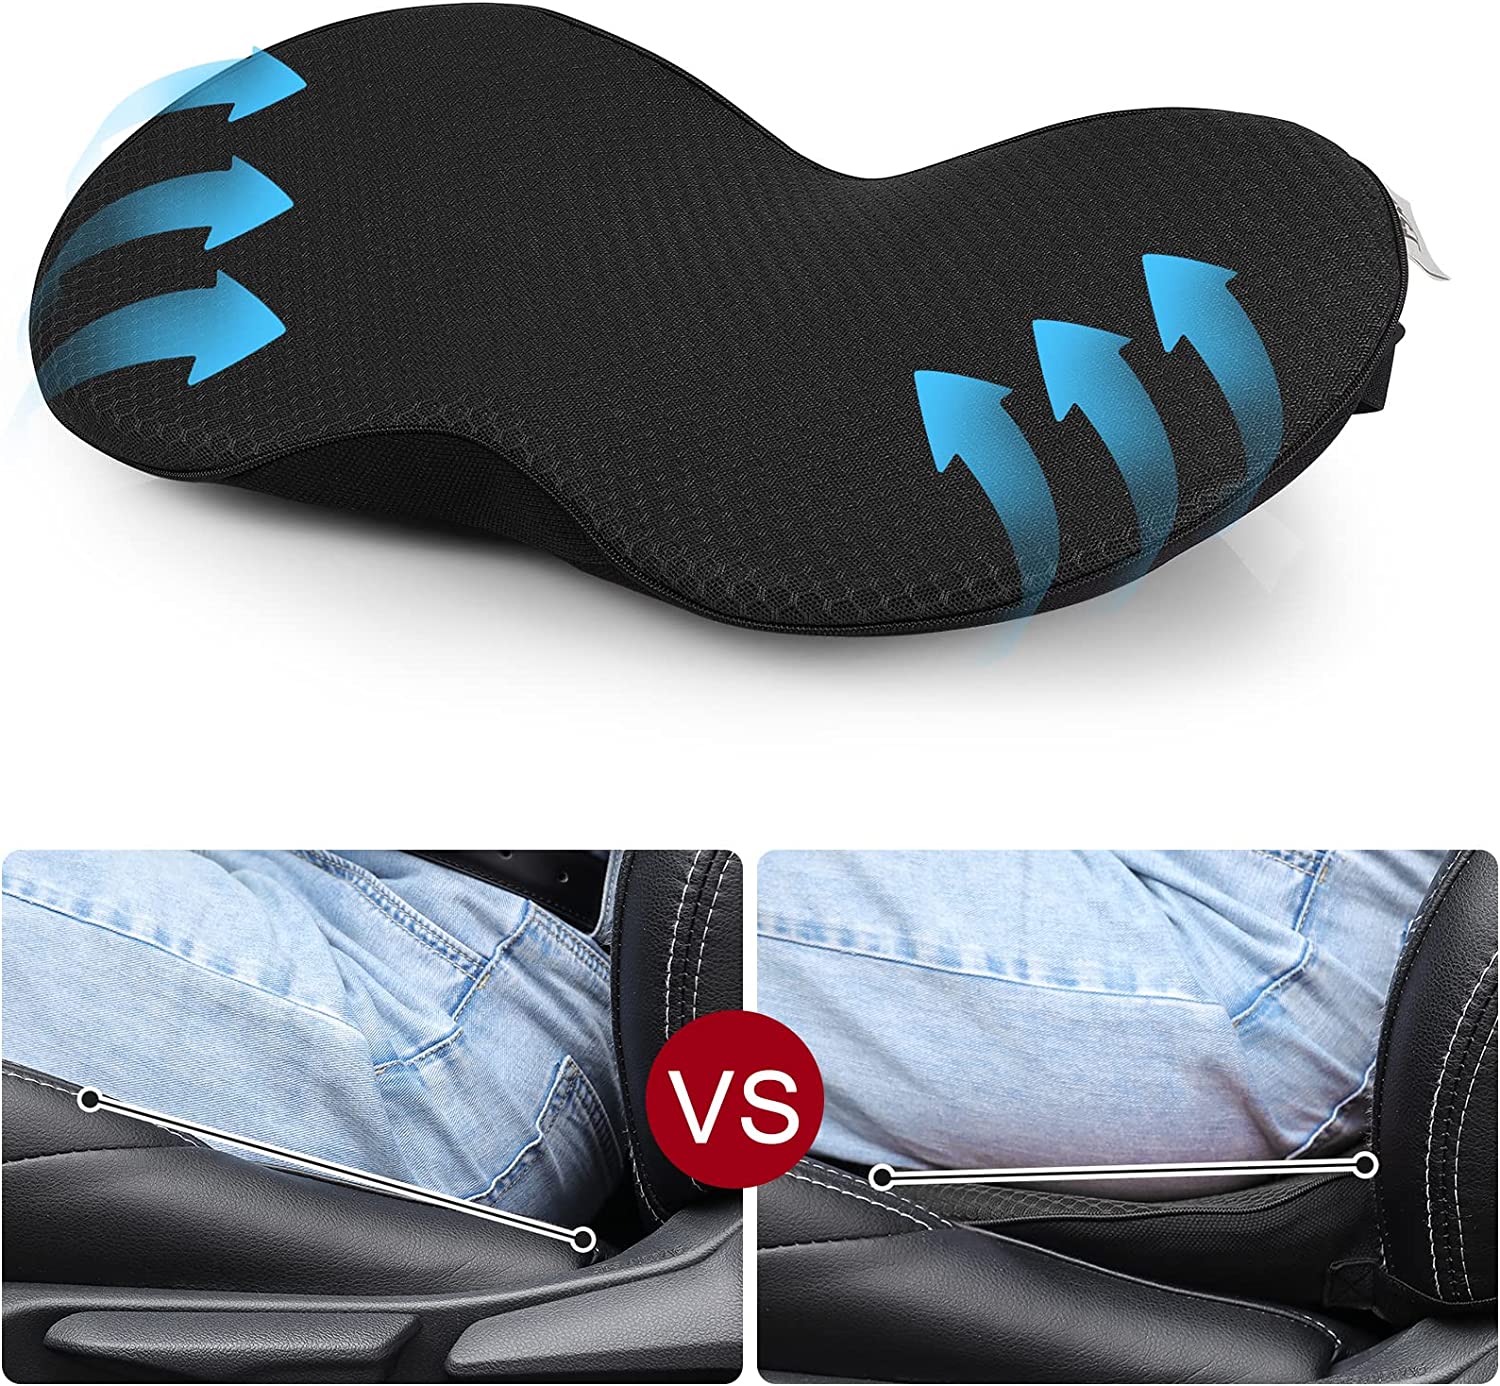 Getphonery Car Seat Cushion for Shorter Drivers Booster Height Riser Adults Short Person Wedge Back Pain Lumbar Support Driving Truck Pillow, Black